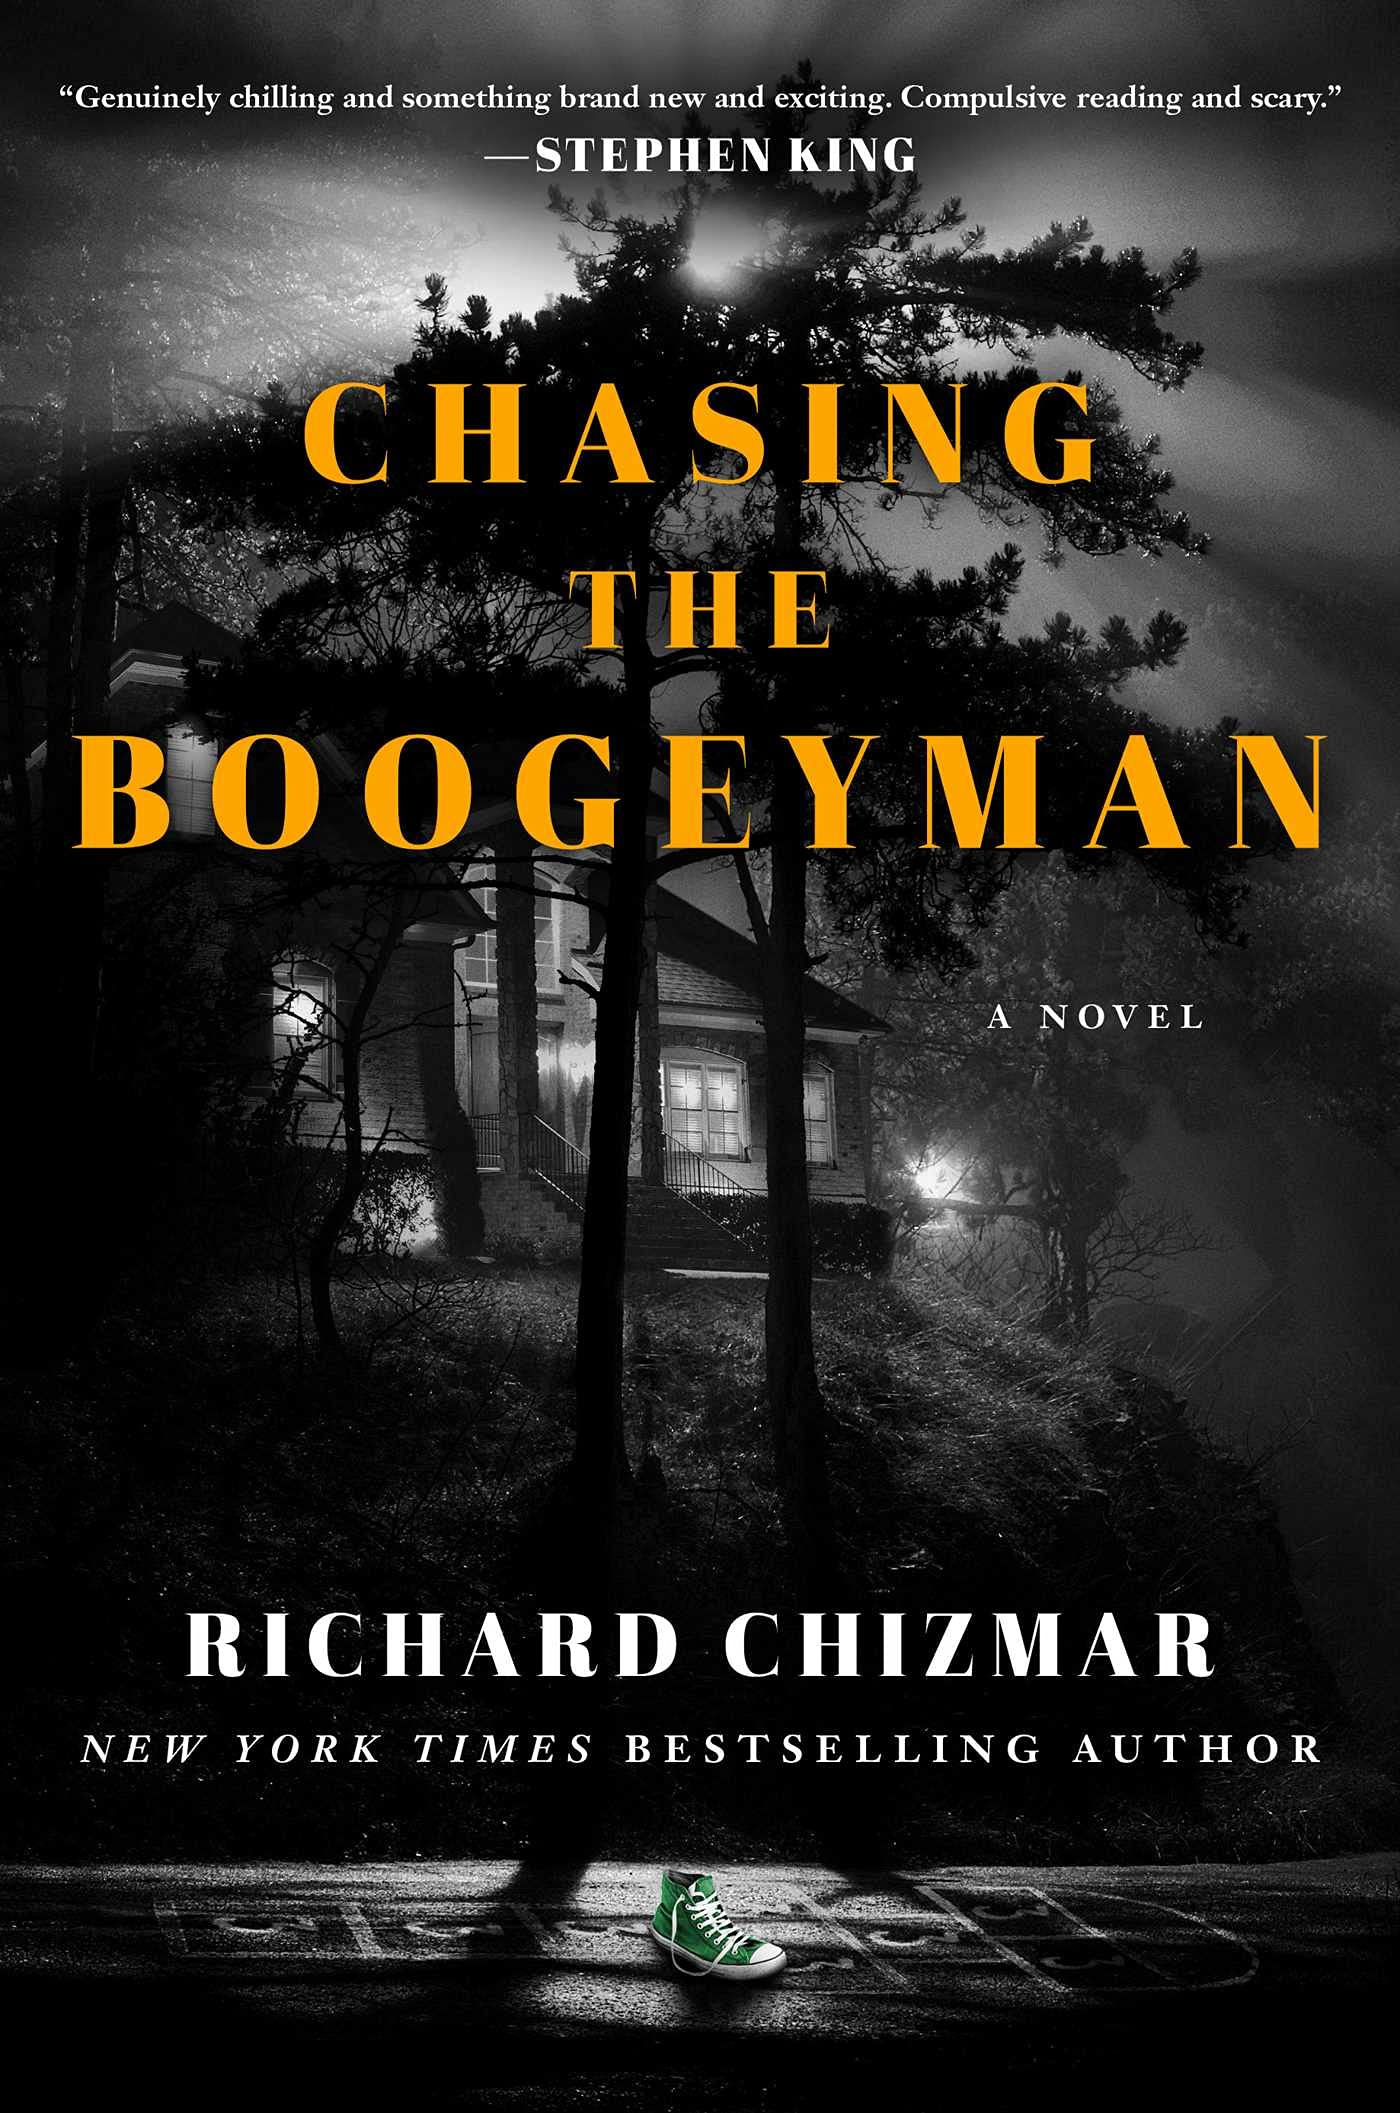 Book Review: CHASING THE BOOGEYMAN | The Horror Review